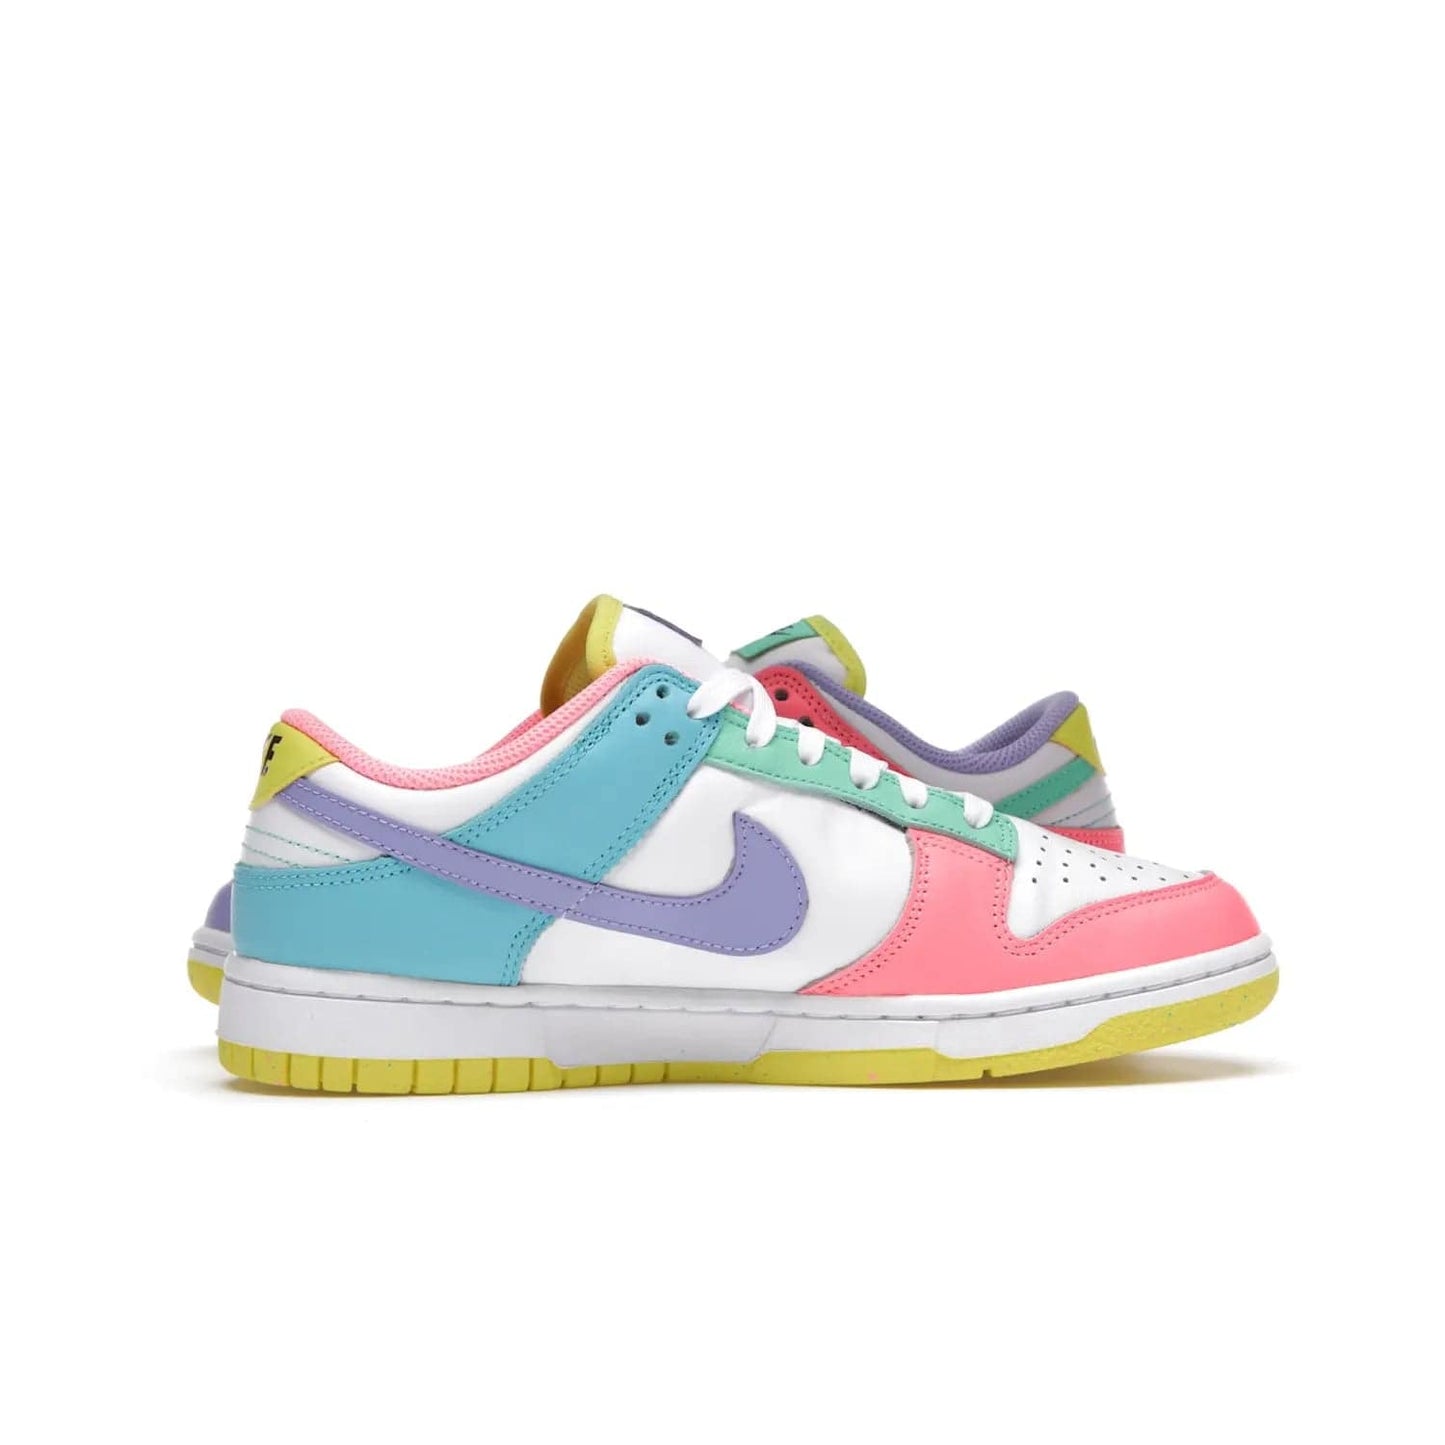 Nike Dunk Low SE Easter Candy (Women's) - Image 18 - Only at www.BallersClubKickz.com - UP
The Nike Dunk Low SE Easter Candy (Women's) brings a stylish touch to any outfit with its white leather upper, colorful accents, and multicolor speckle detailing. Shop now before they're gone.